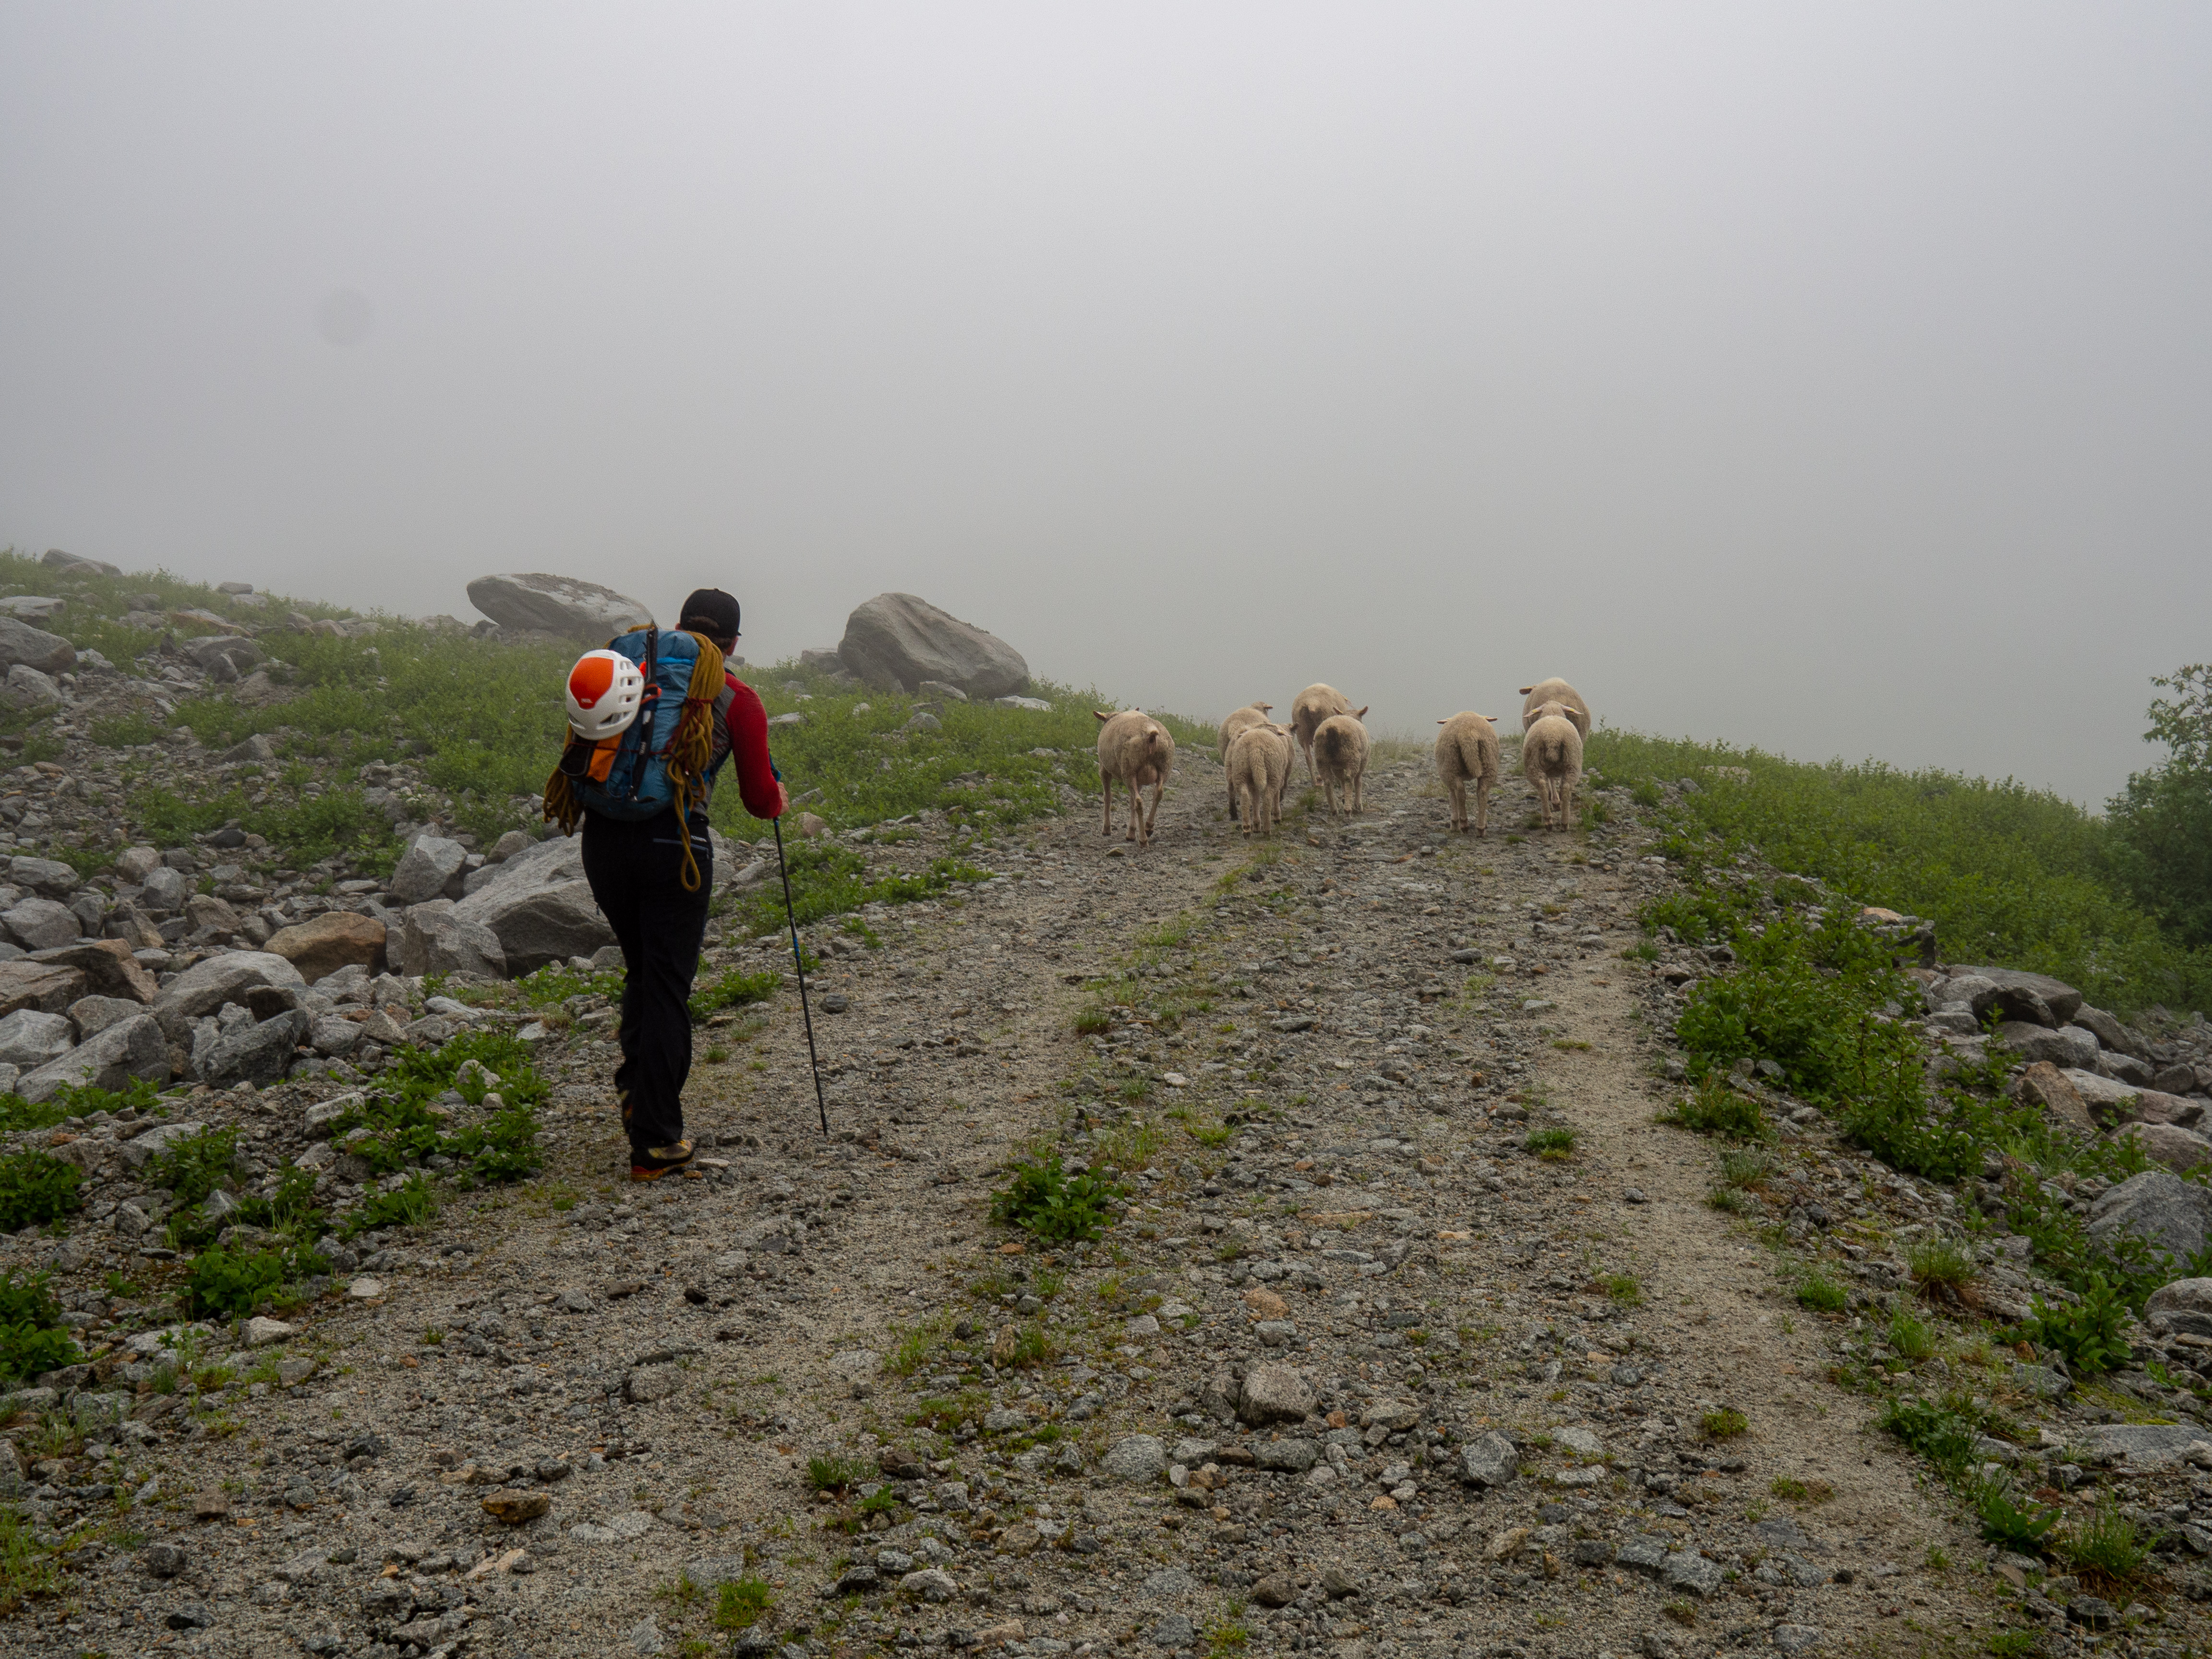 A group of sheep leading the way during the approach